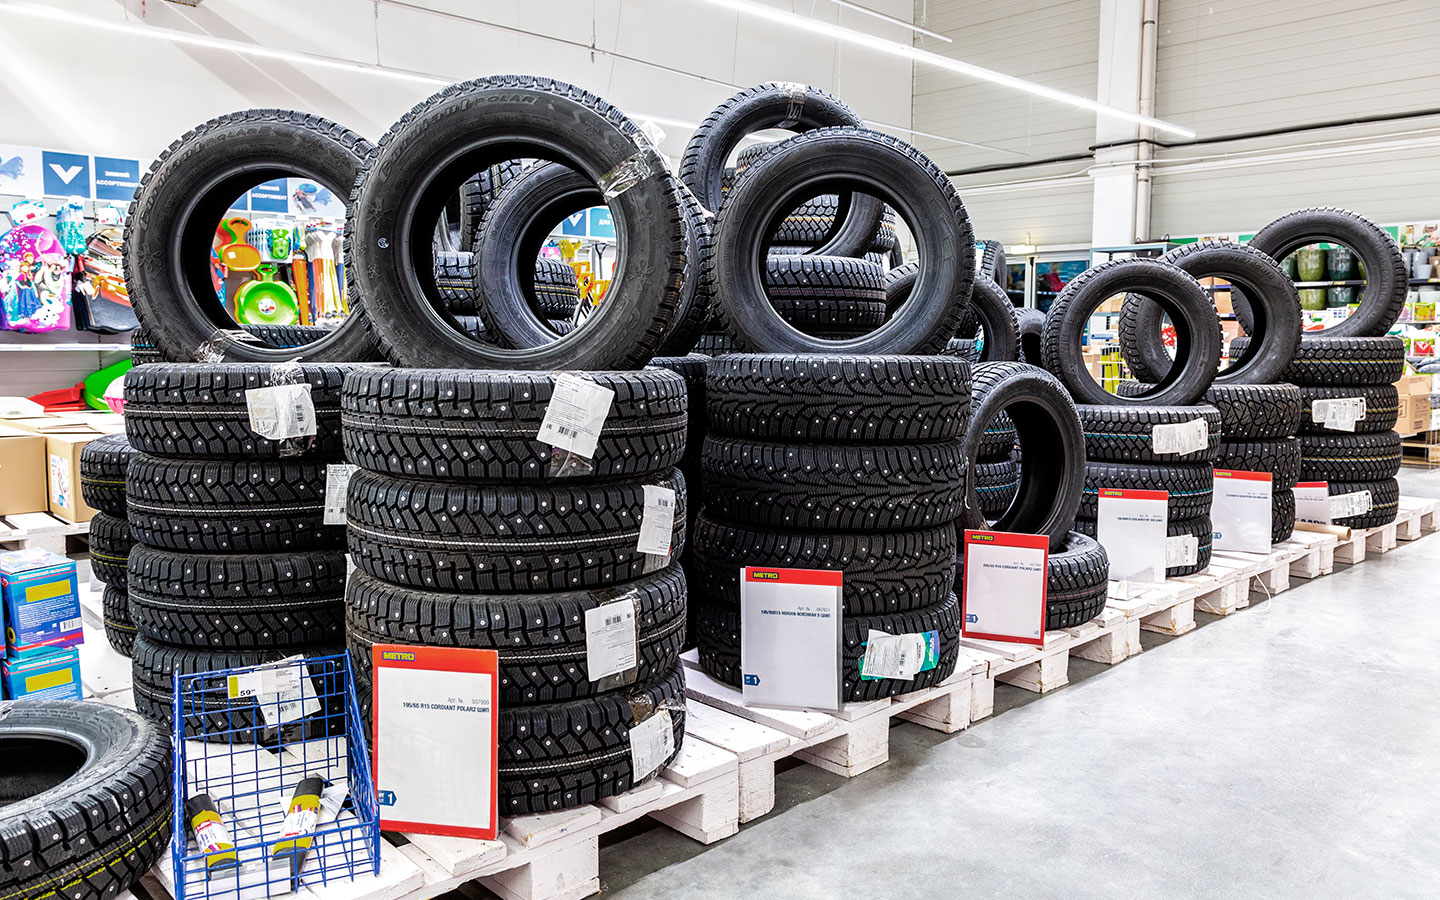 How many types of tires are there?